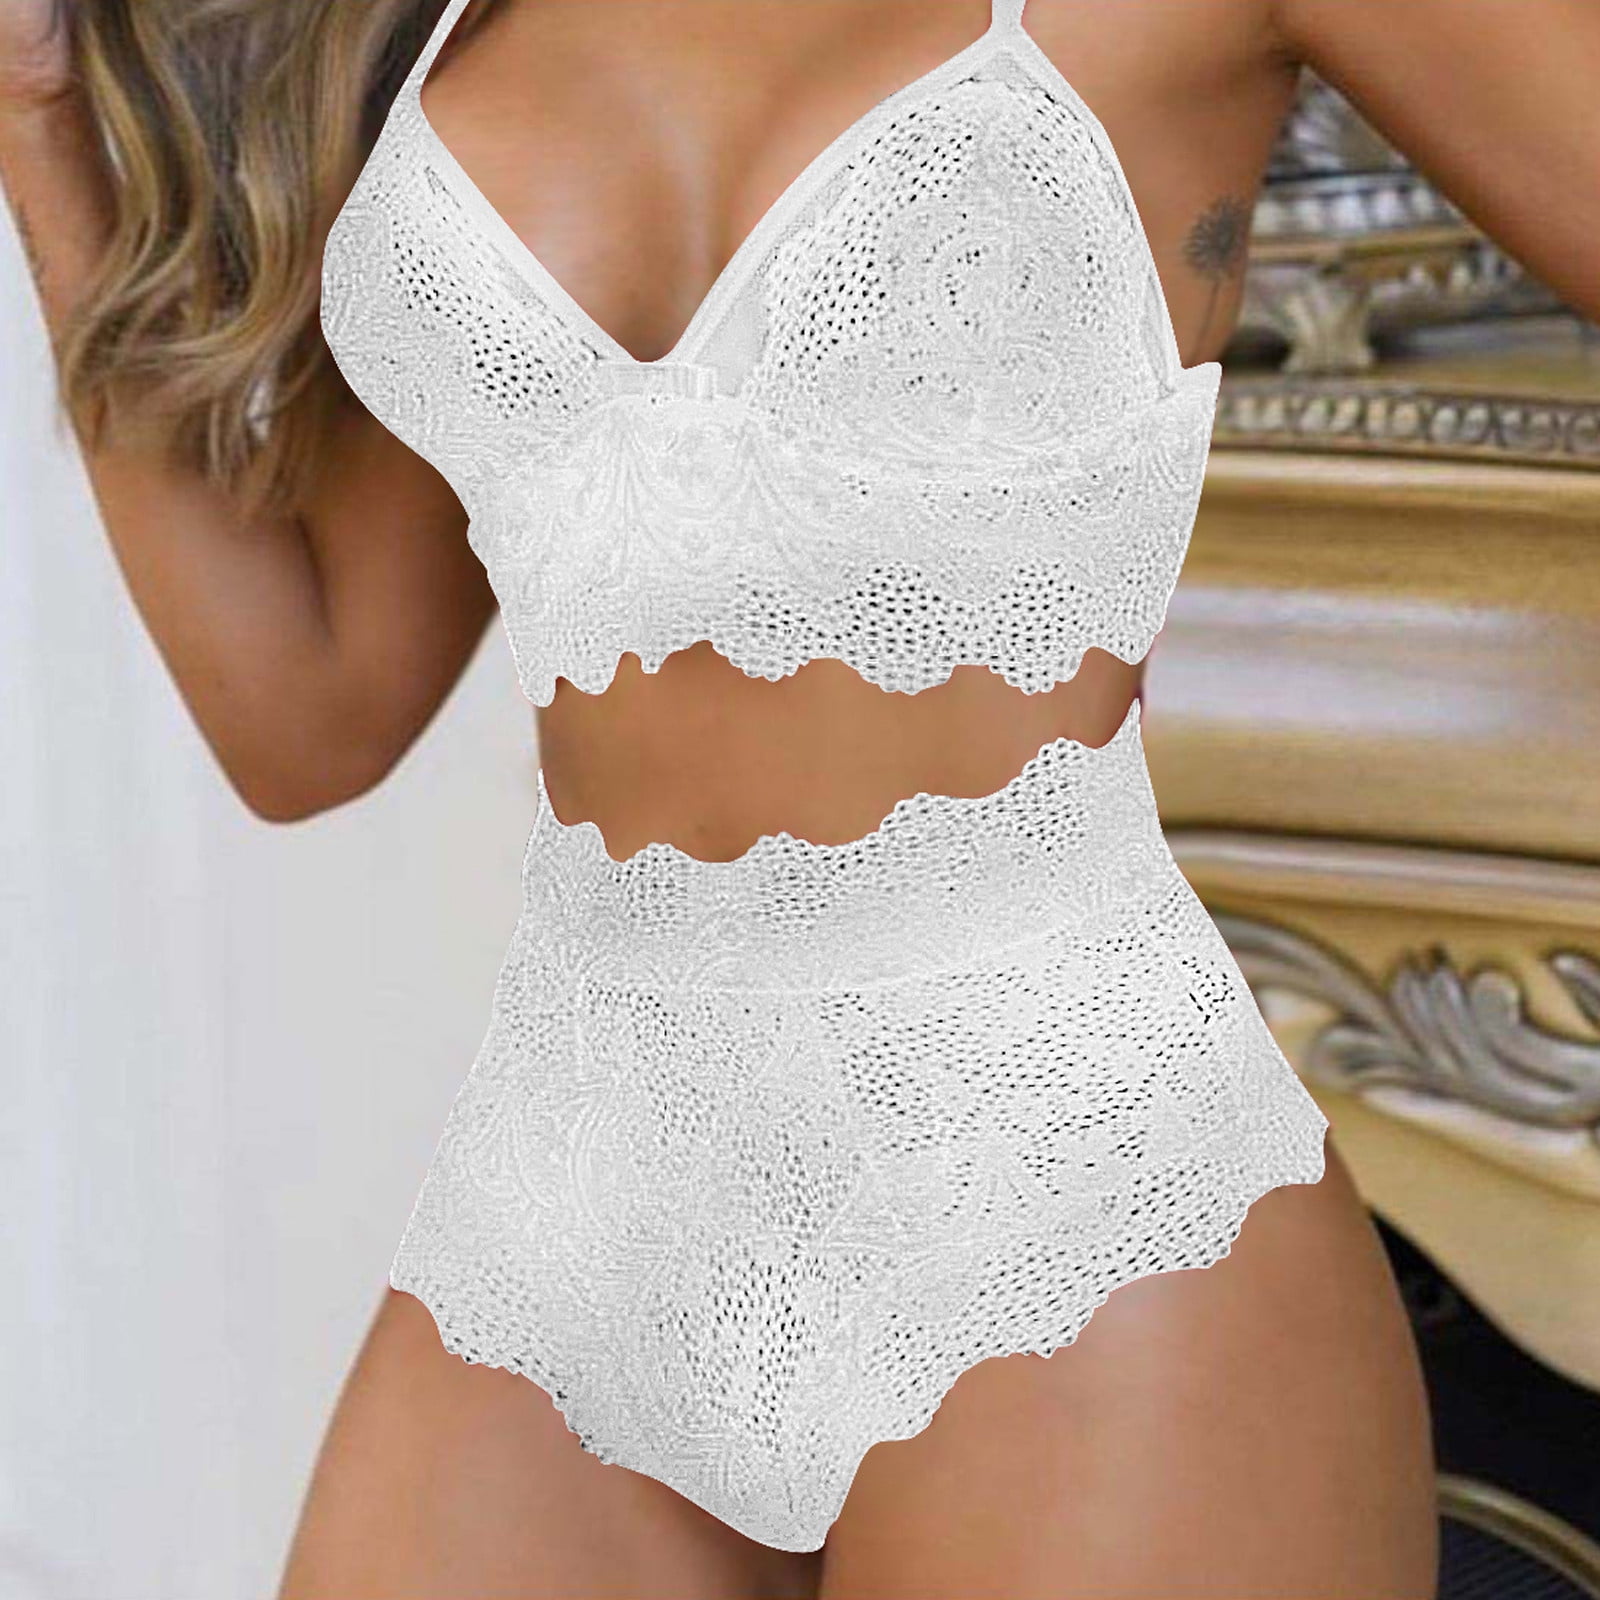 Erotic Transparent Babydoll Bra And Panties Set Back For Women Sexy  Lingerie Costume For Under Temptation 1233t From Sadfk, $33.84